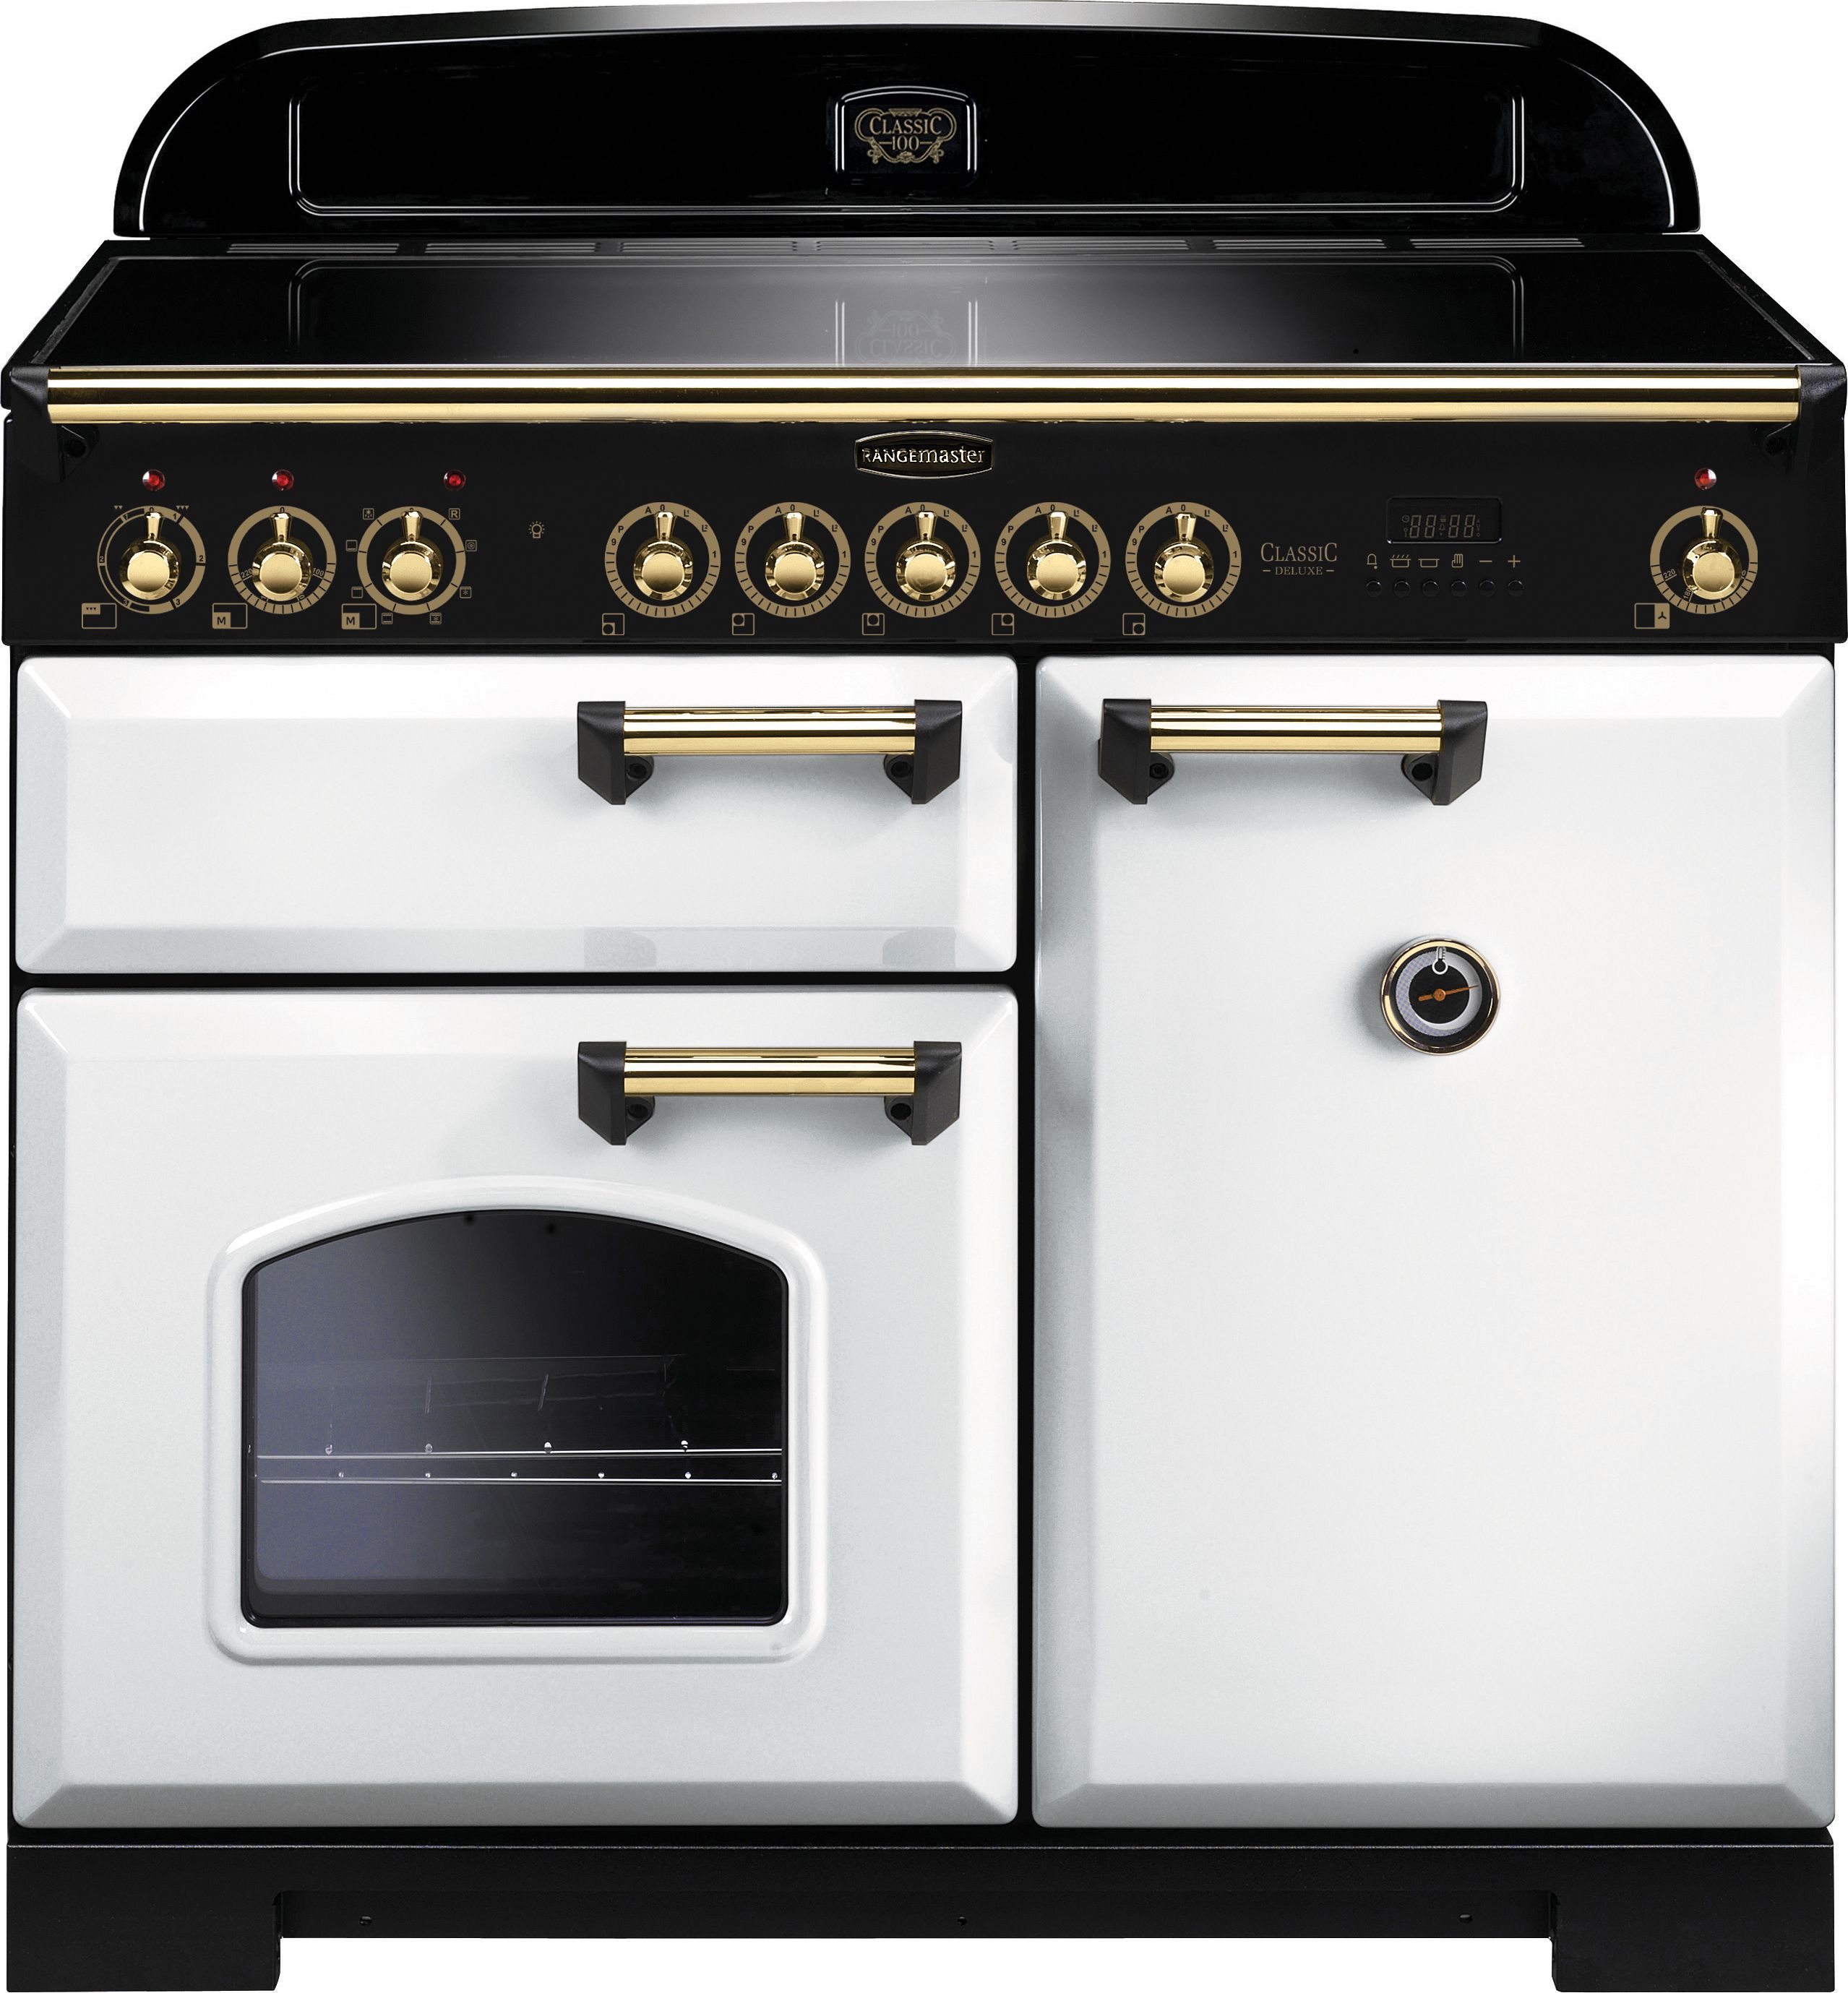 Rangemaster Classic Deluxe CDL100EIWH/B 100cm Electric Range Cooker with Induction Hob - White / Brass - A/A Rated, White